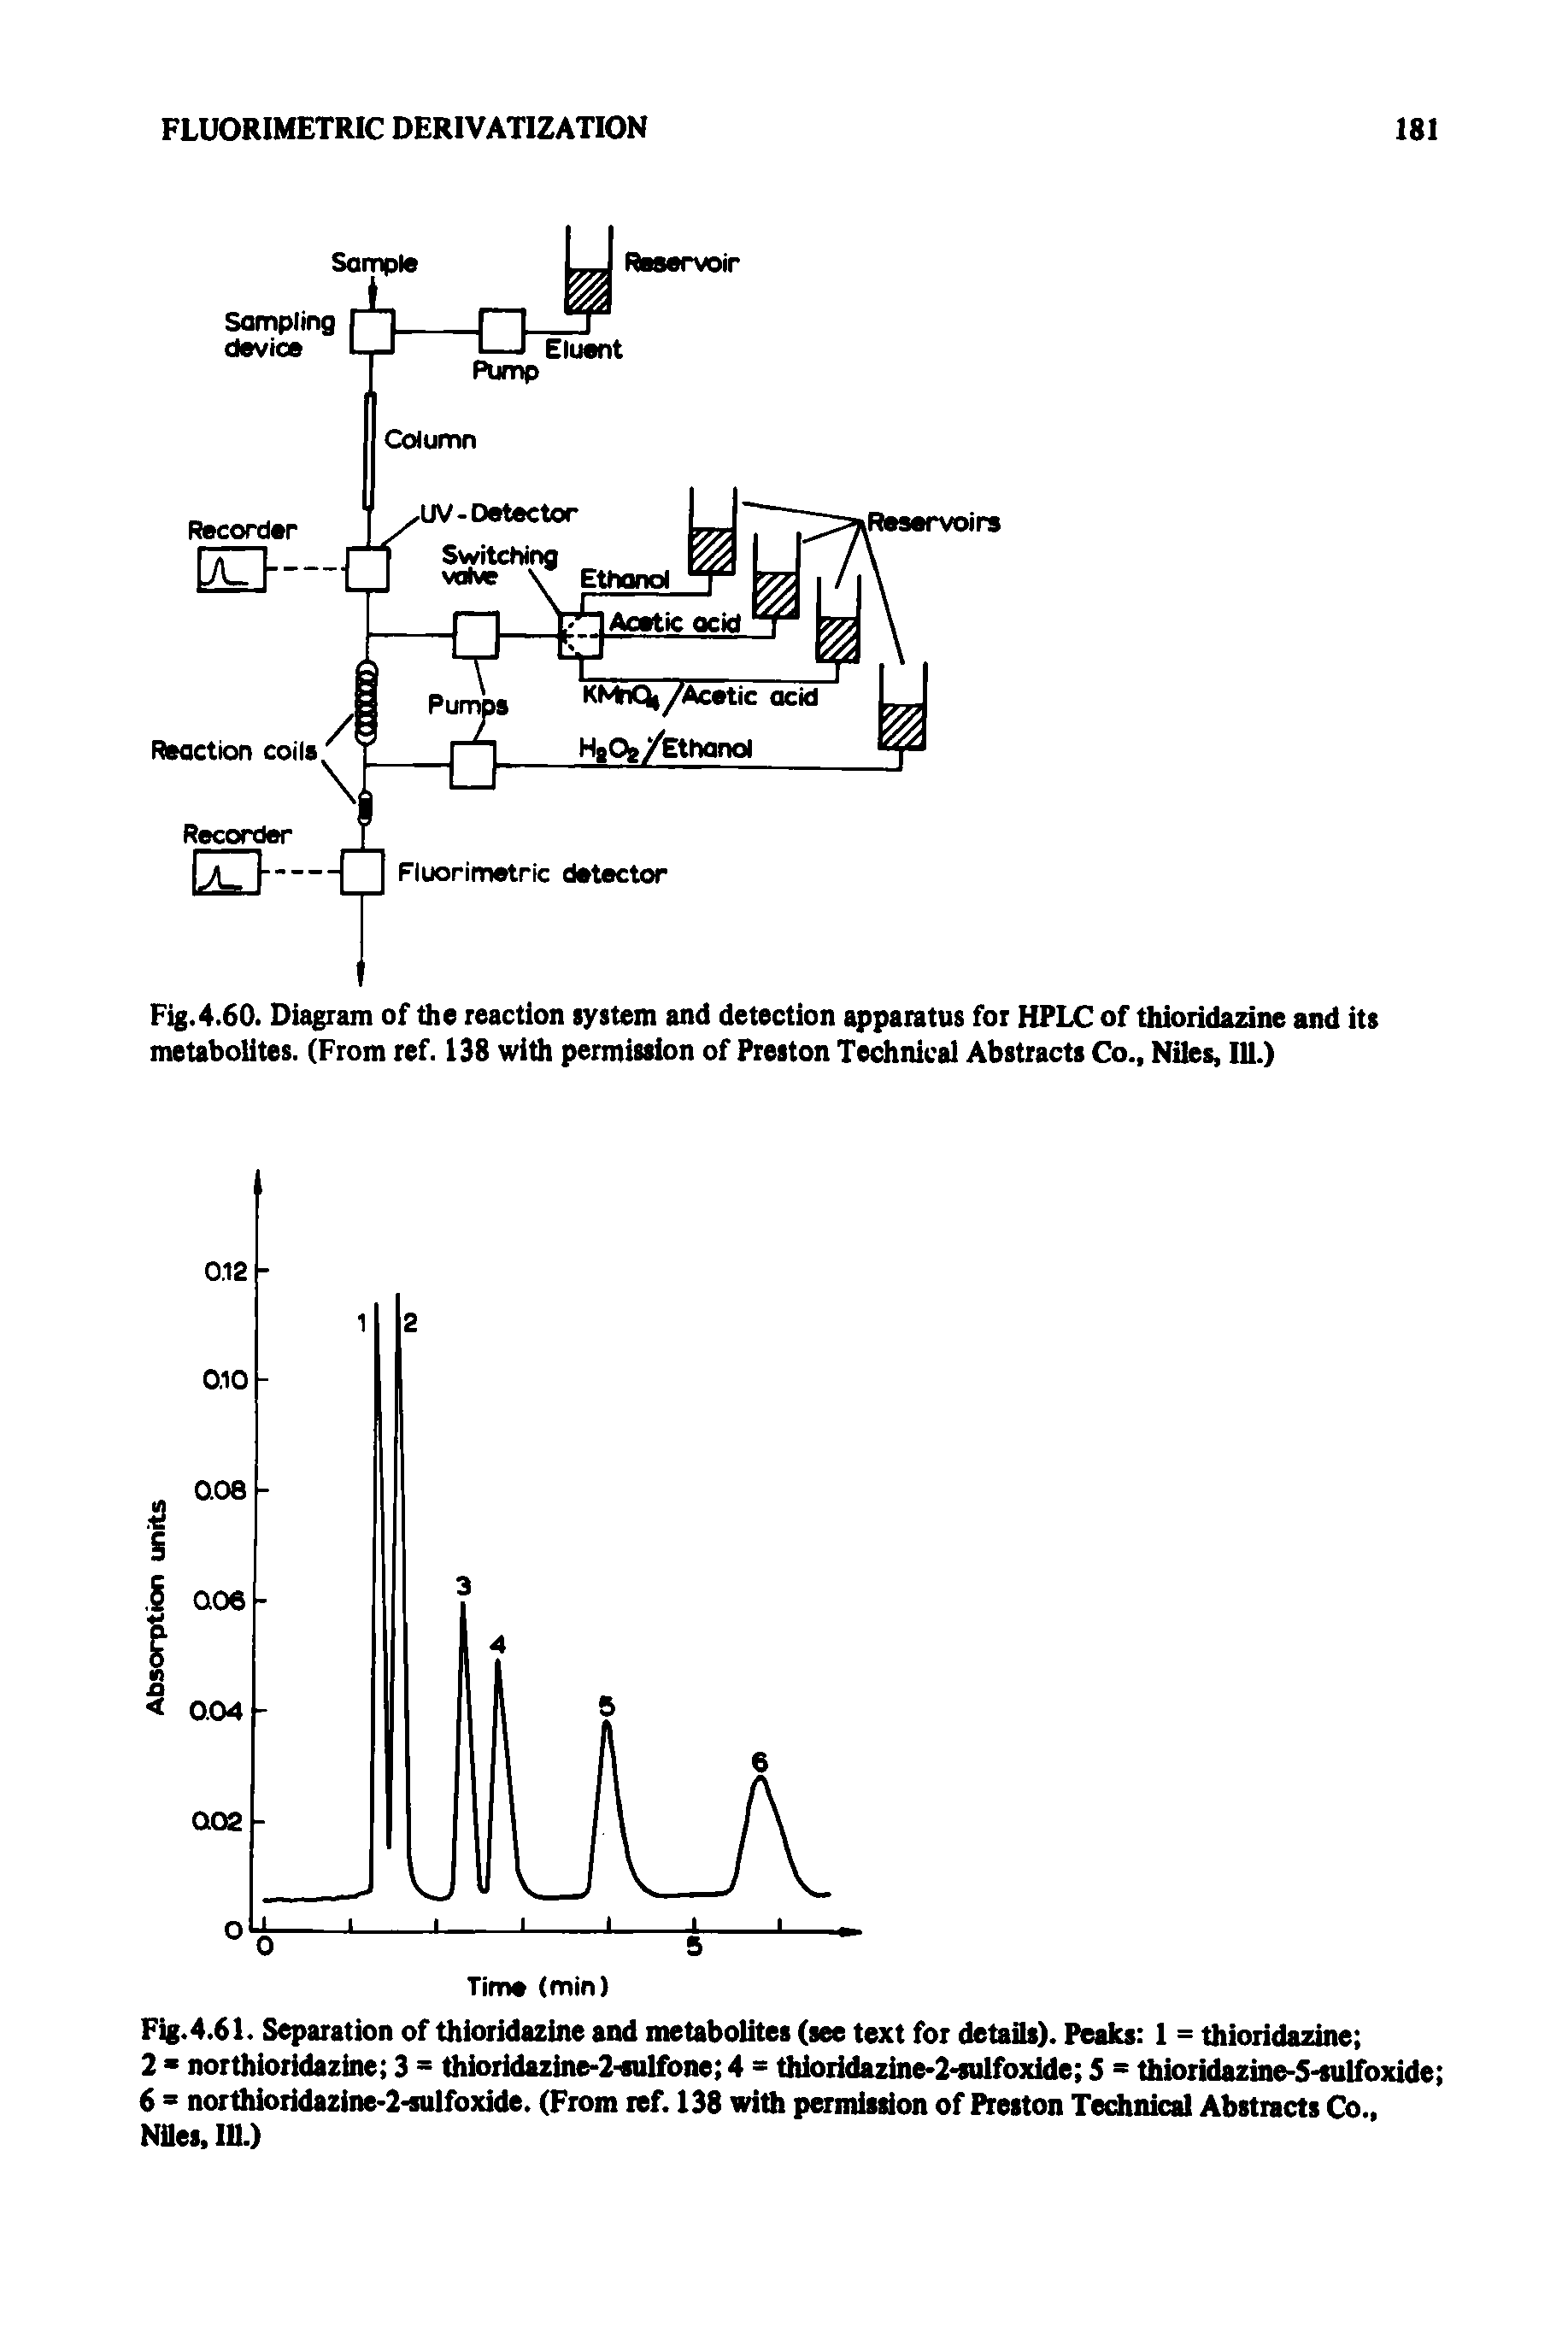 Fig.4.60. Diagram of the reaction system and detection apparatus for HPLC of thioridazine and its metabolites. (From ref. 138 with permission of Preston Technical Abstracts Co., Niles, 111.)...